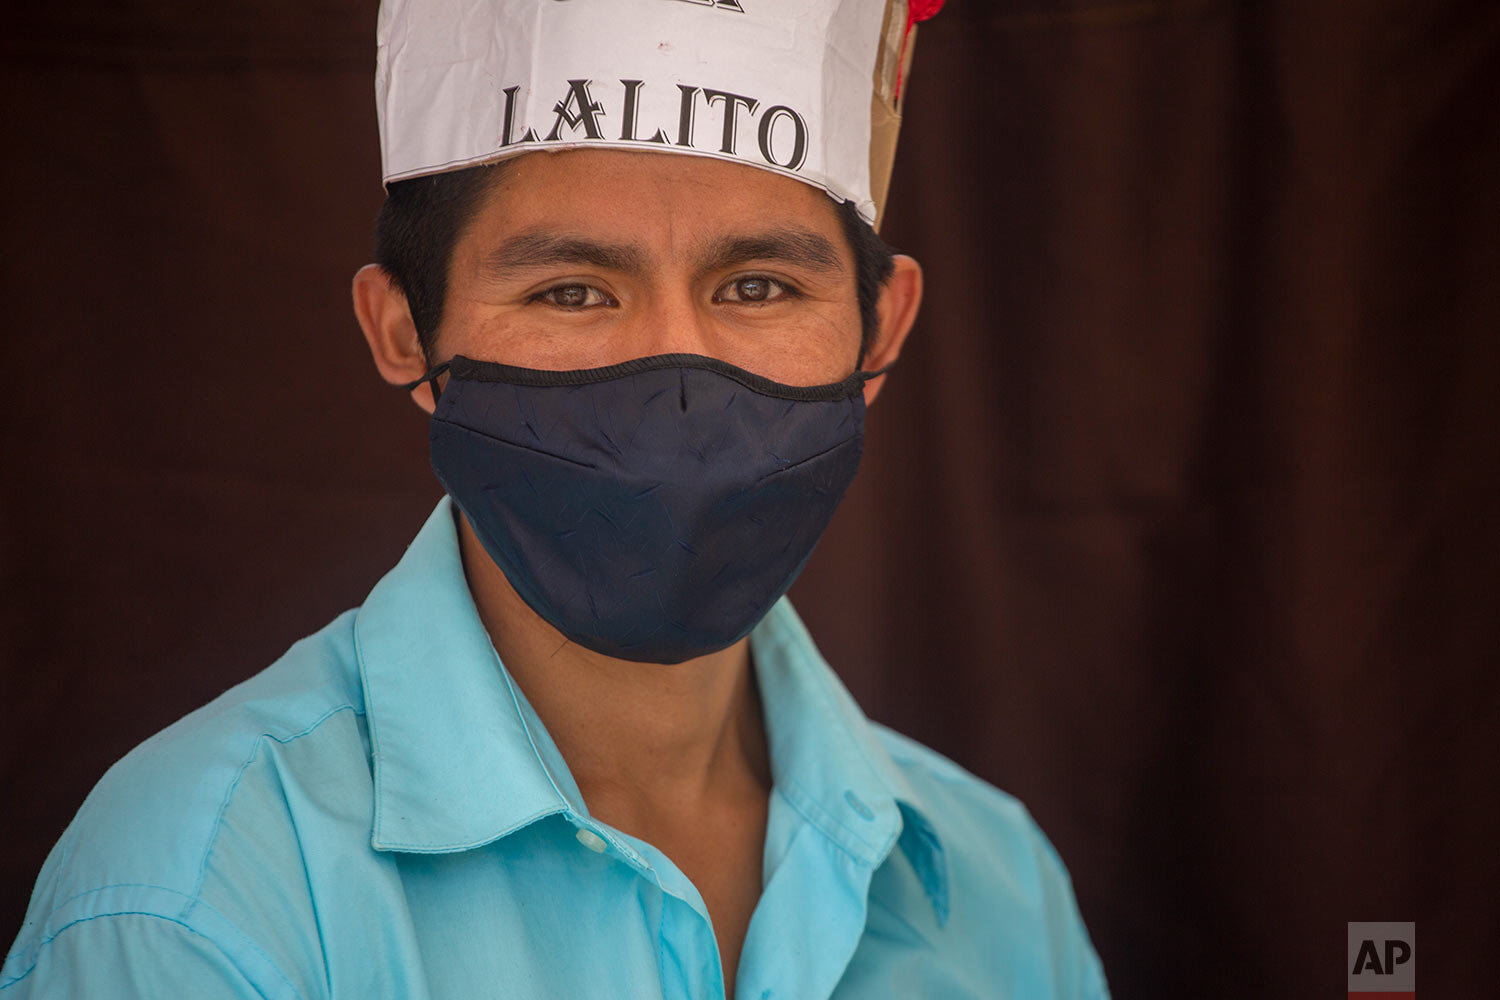  Teacher Gerardo Ixcoy, wearing a protective face mask, found a way to give individual instruction to his sixth-grade students amid the new coronavirus pandemic, in Santa Cruz del Quiche, Guatemala, Wednesday, July 15, 2020. Ixcoy, known universally 